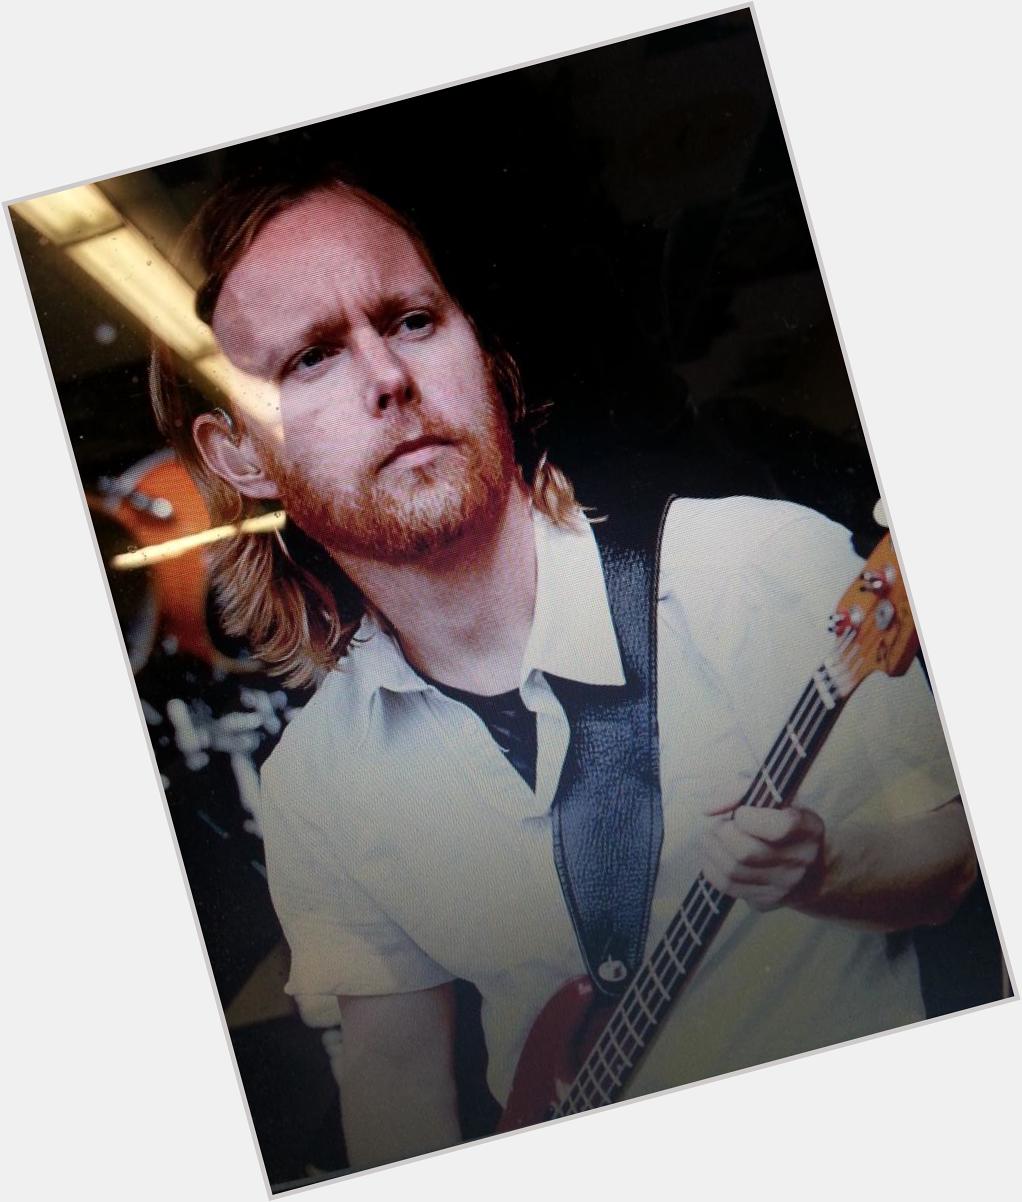 Happy Birthday to a great punk/rock bassist, Nate Mendel of The !Rock on brotha man  